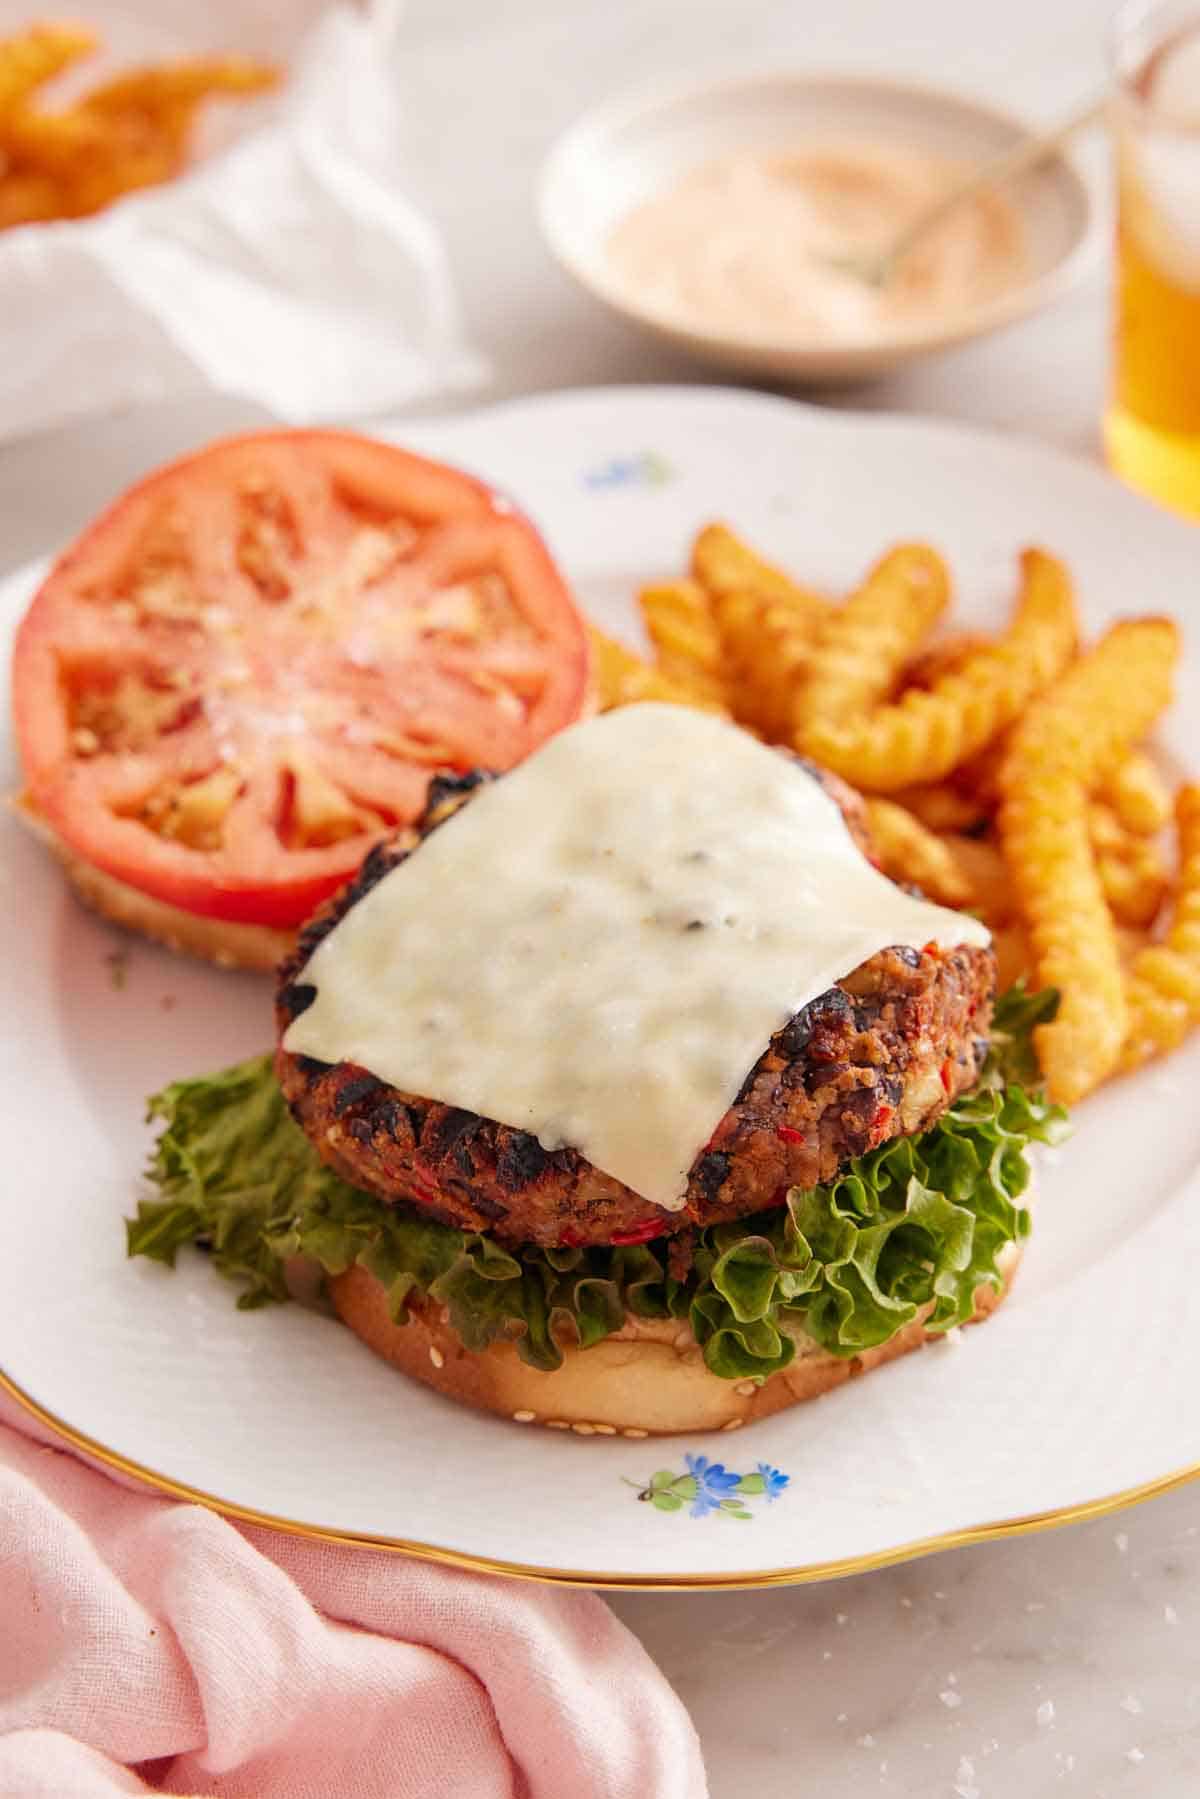 A plate with a black bean burger with a slice of melted cheese on top with the burger bun with a tomato slice in the background.